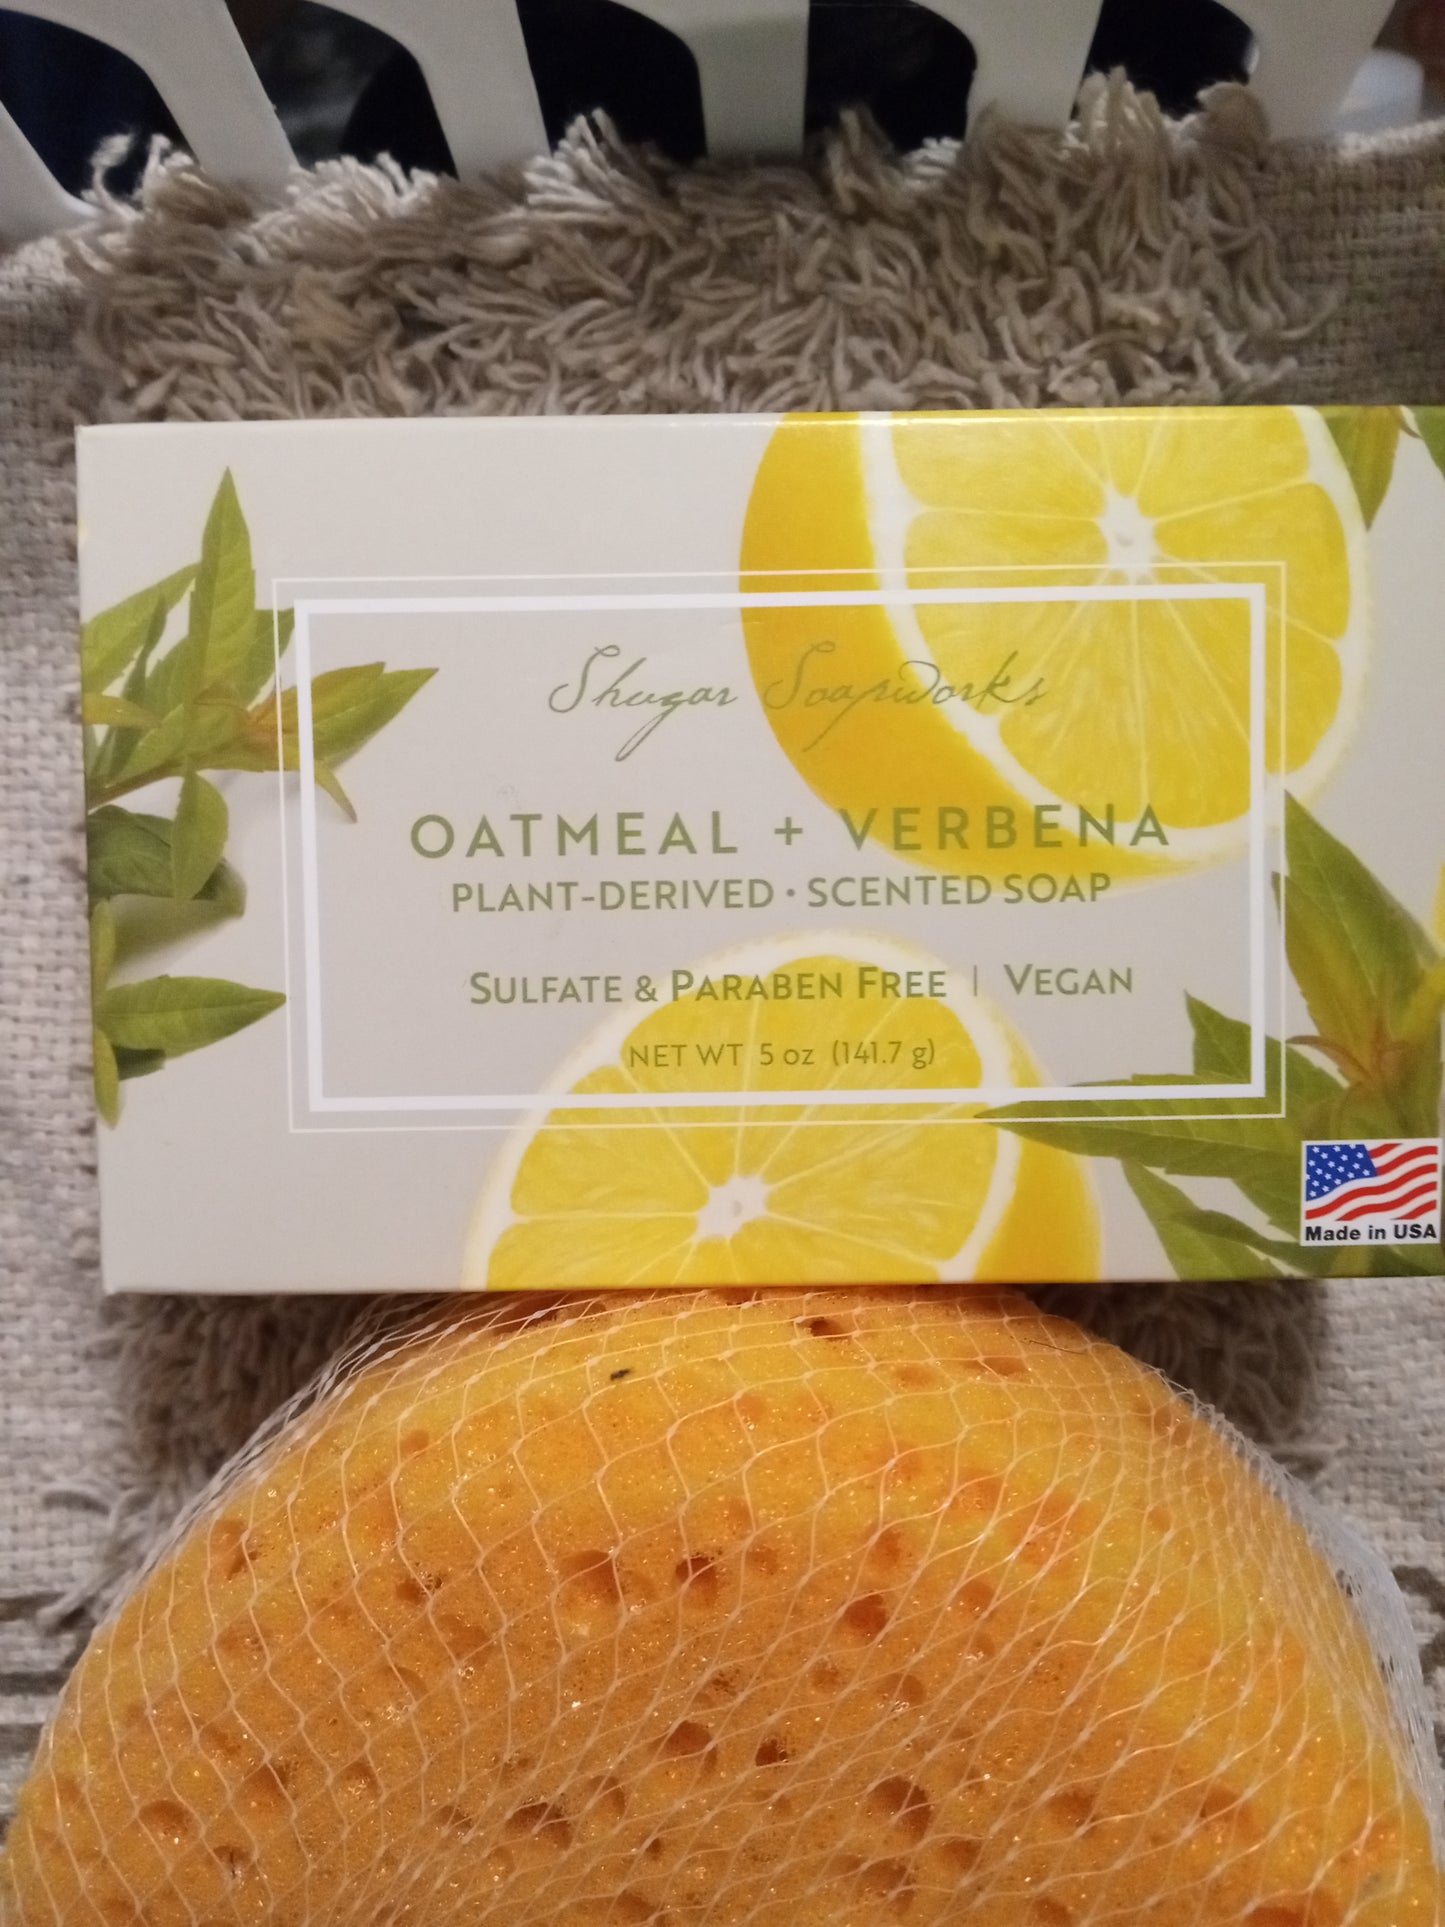 Oatmeal and verbena plant derived scented soap sulfate and parabane-free vegan sz 5 oz